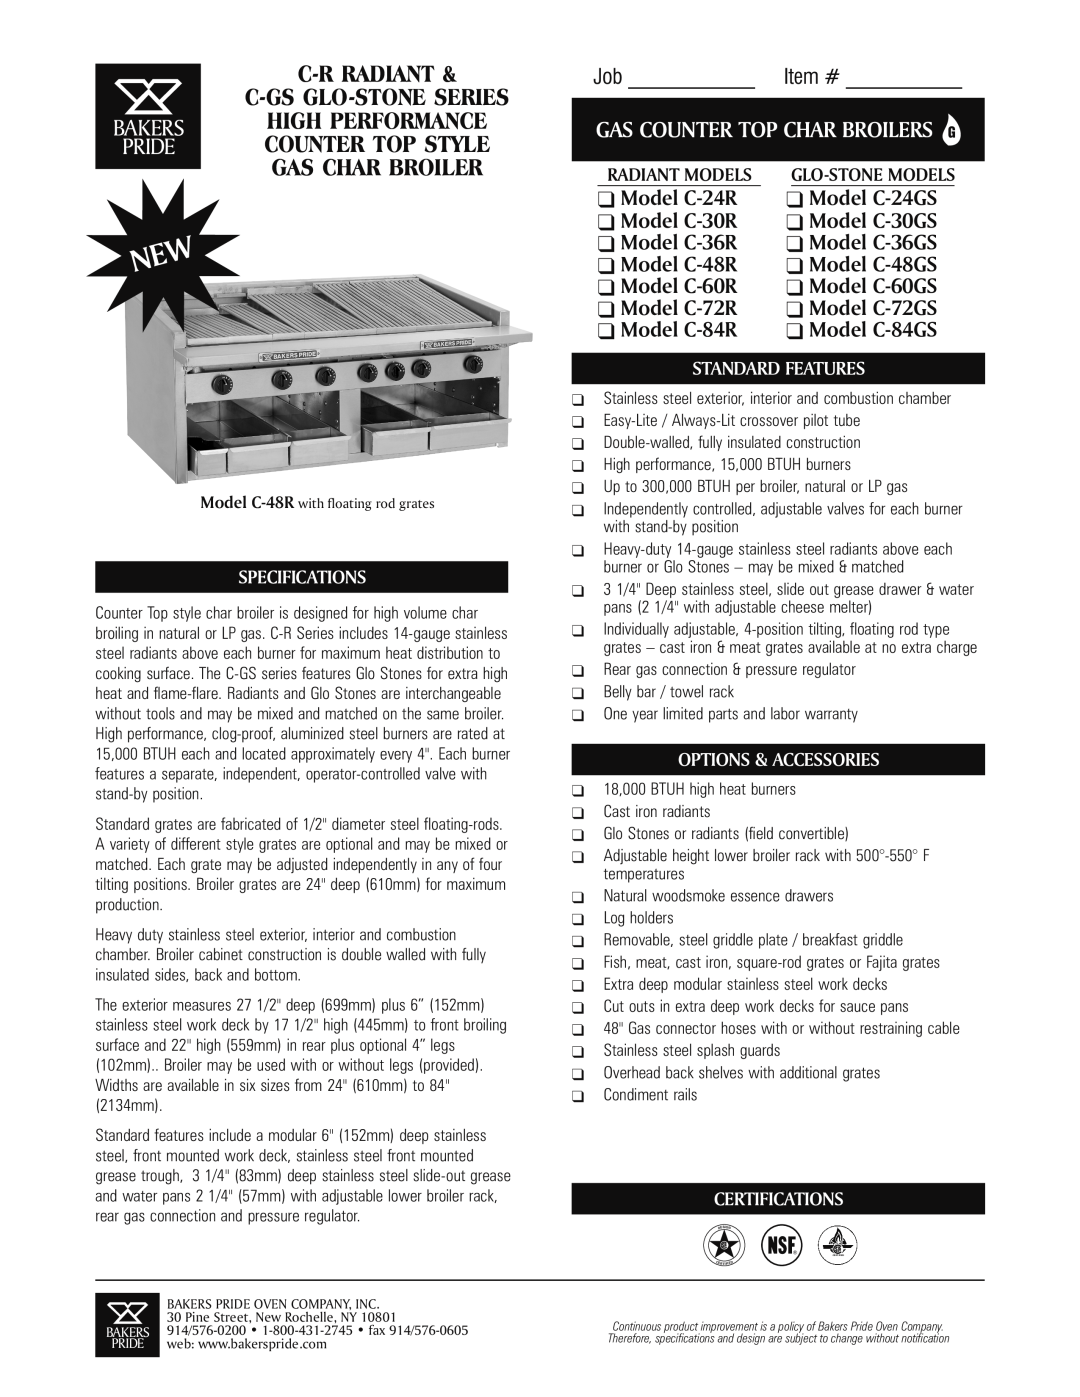 Bakers Pride Oven C-48R specifications Gas Char Broiler, C-R Radiant, Counter Top Style, Gas Counter Top Char Broilers G 